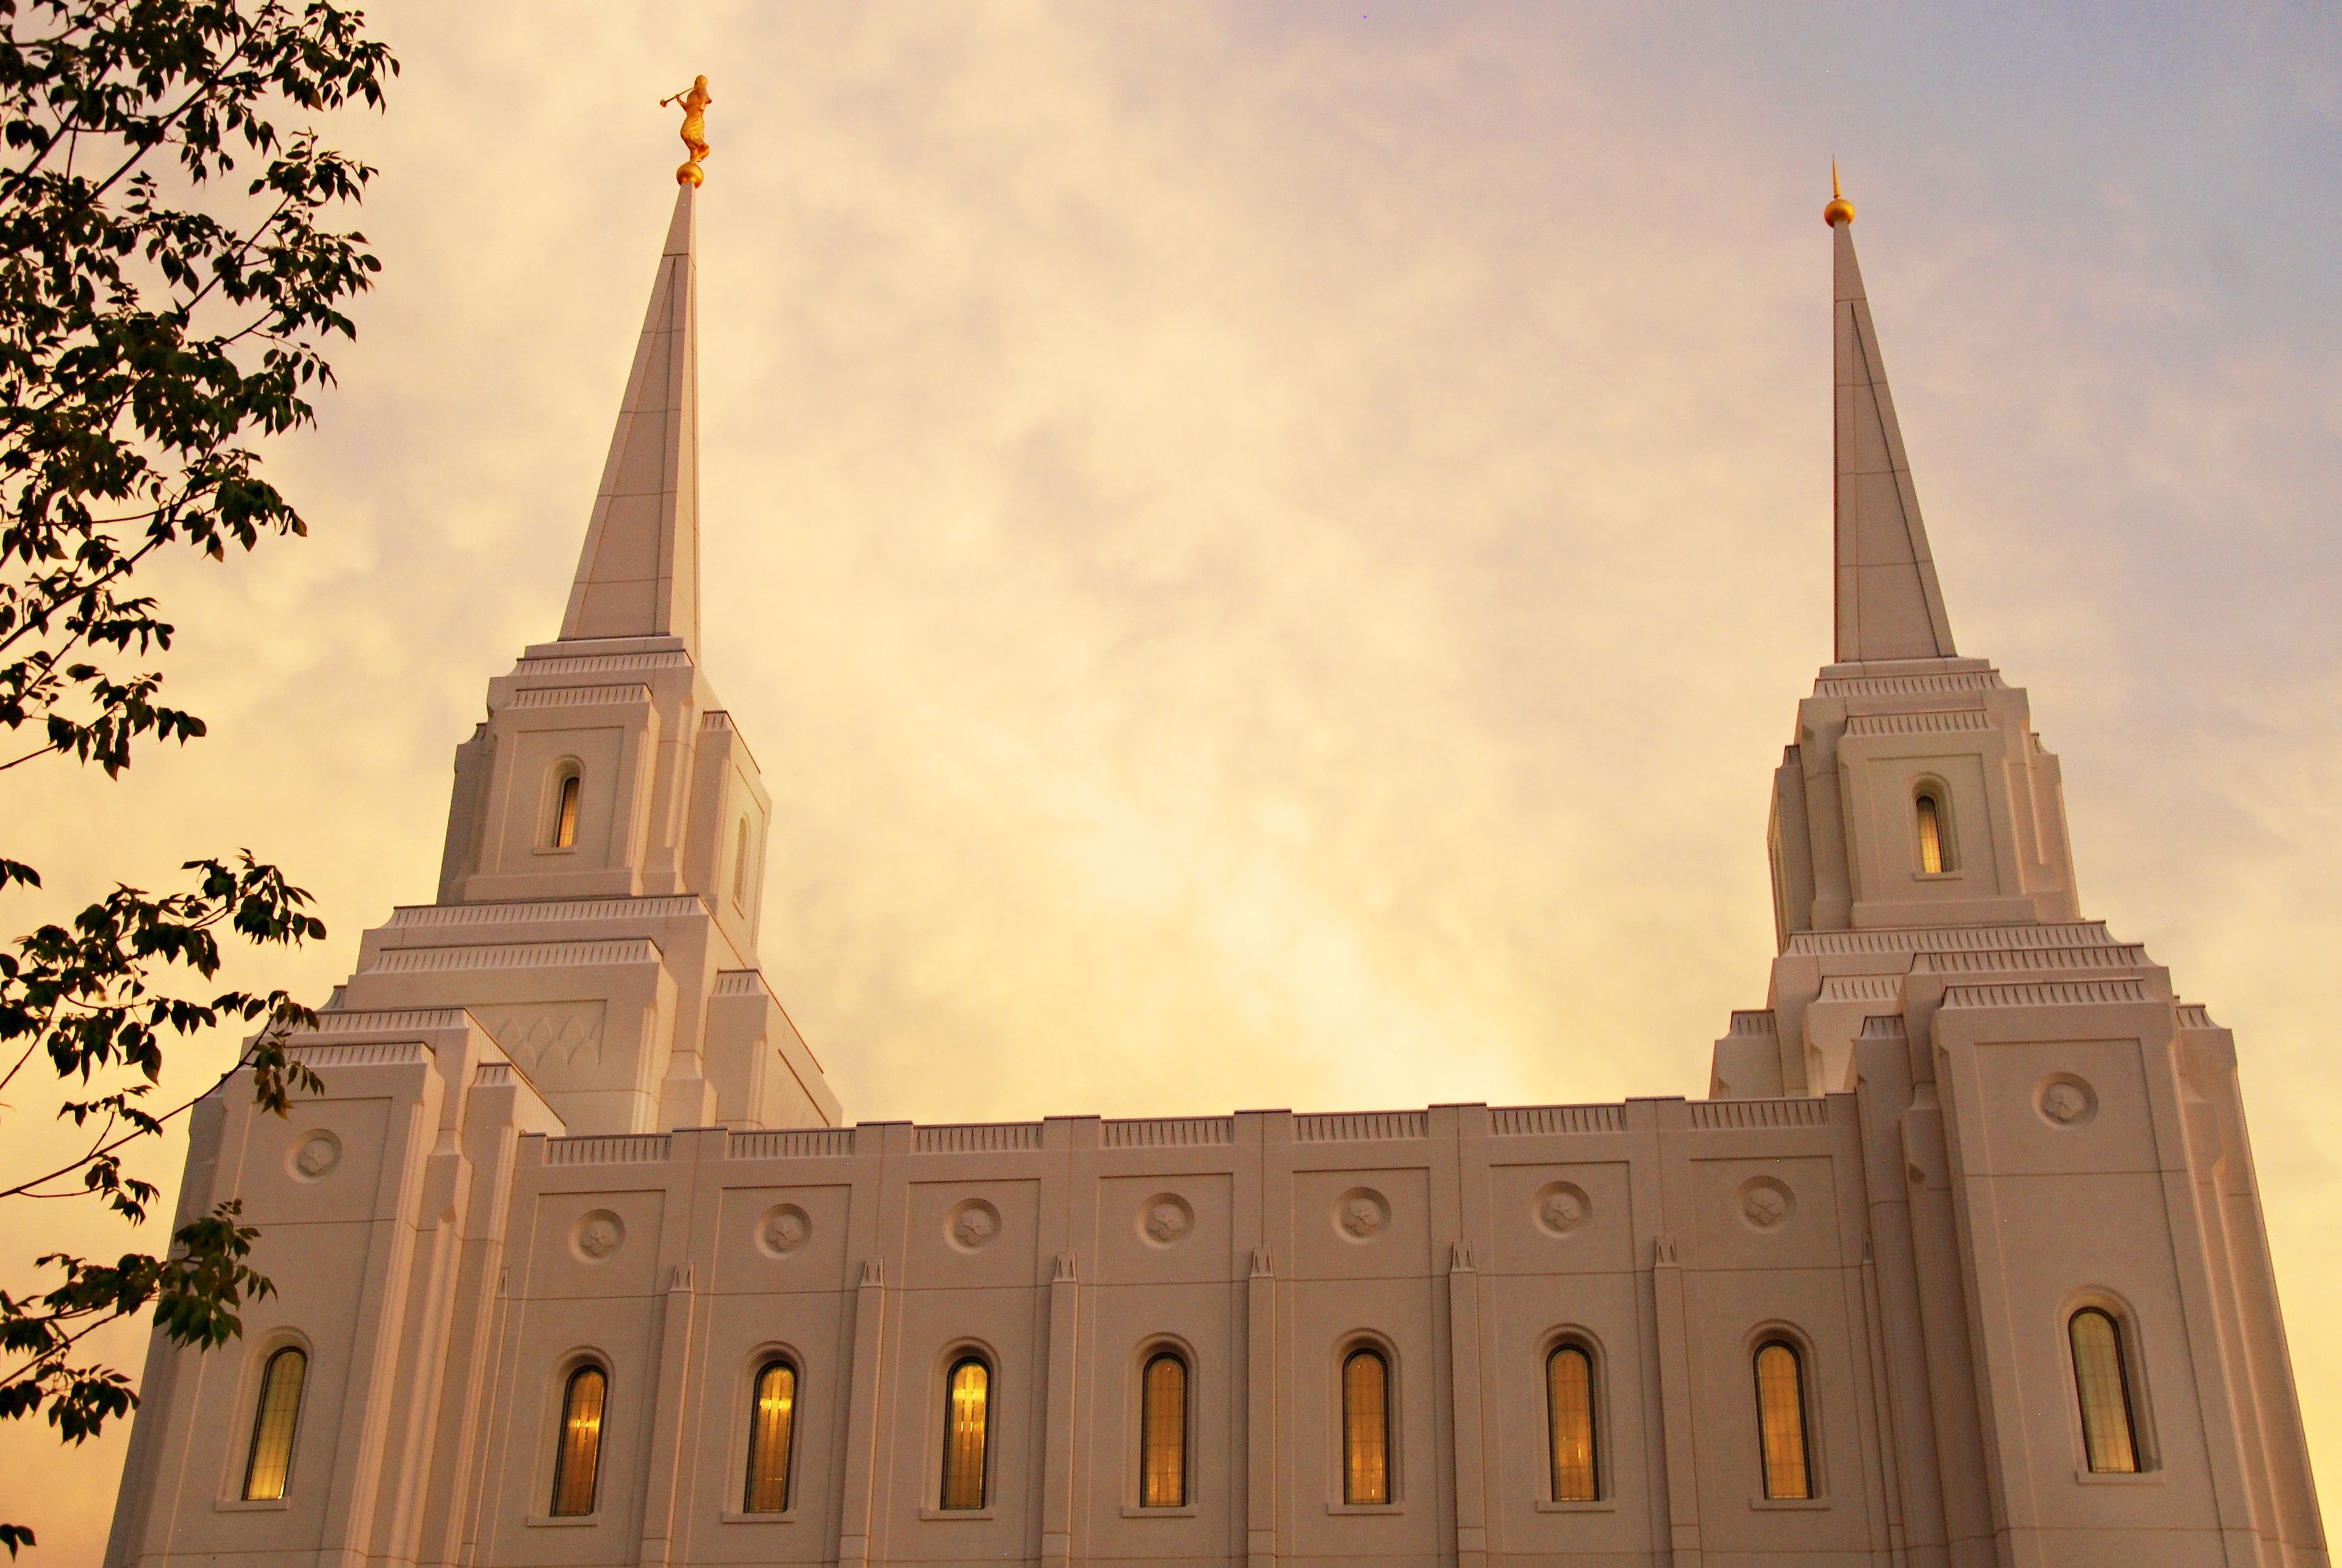 The Brigham City Utah Temple at dawn, including spires and windows.